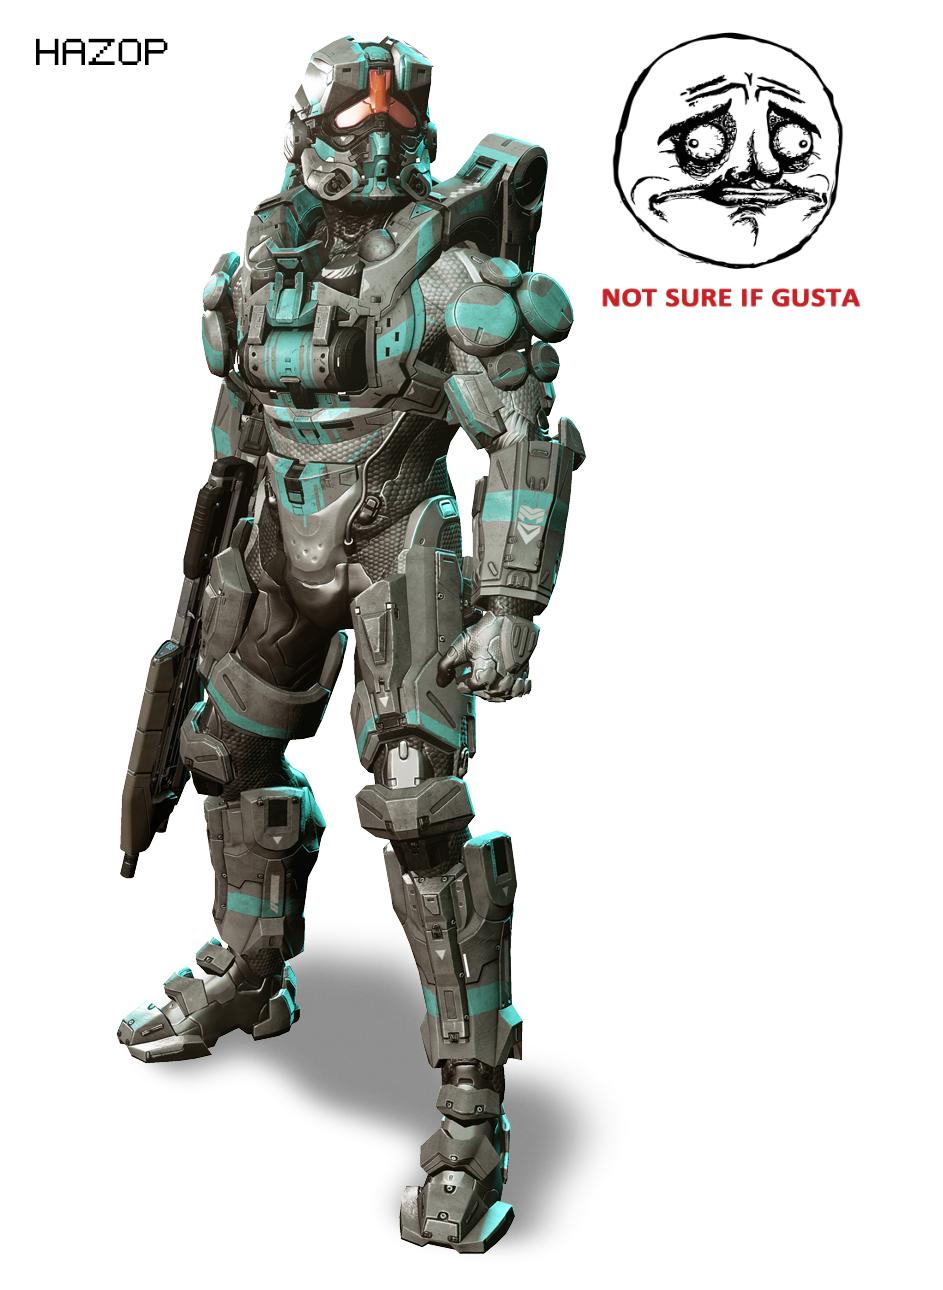 All-I-can-think-of-when-I-see-the-Halo-4-HAZOP-armor.jpe